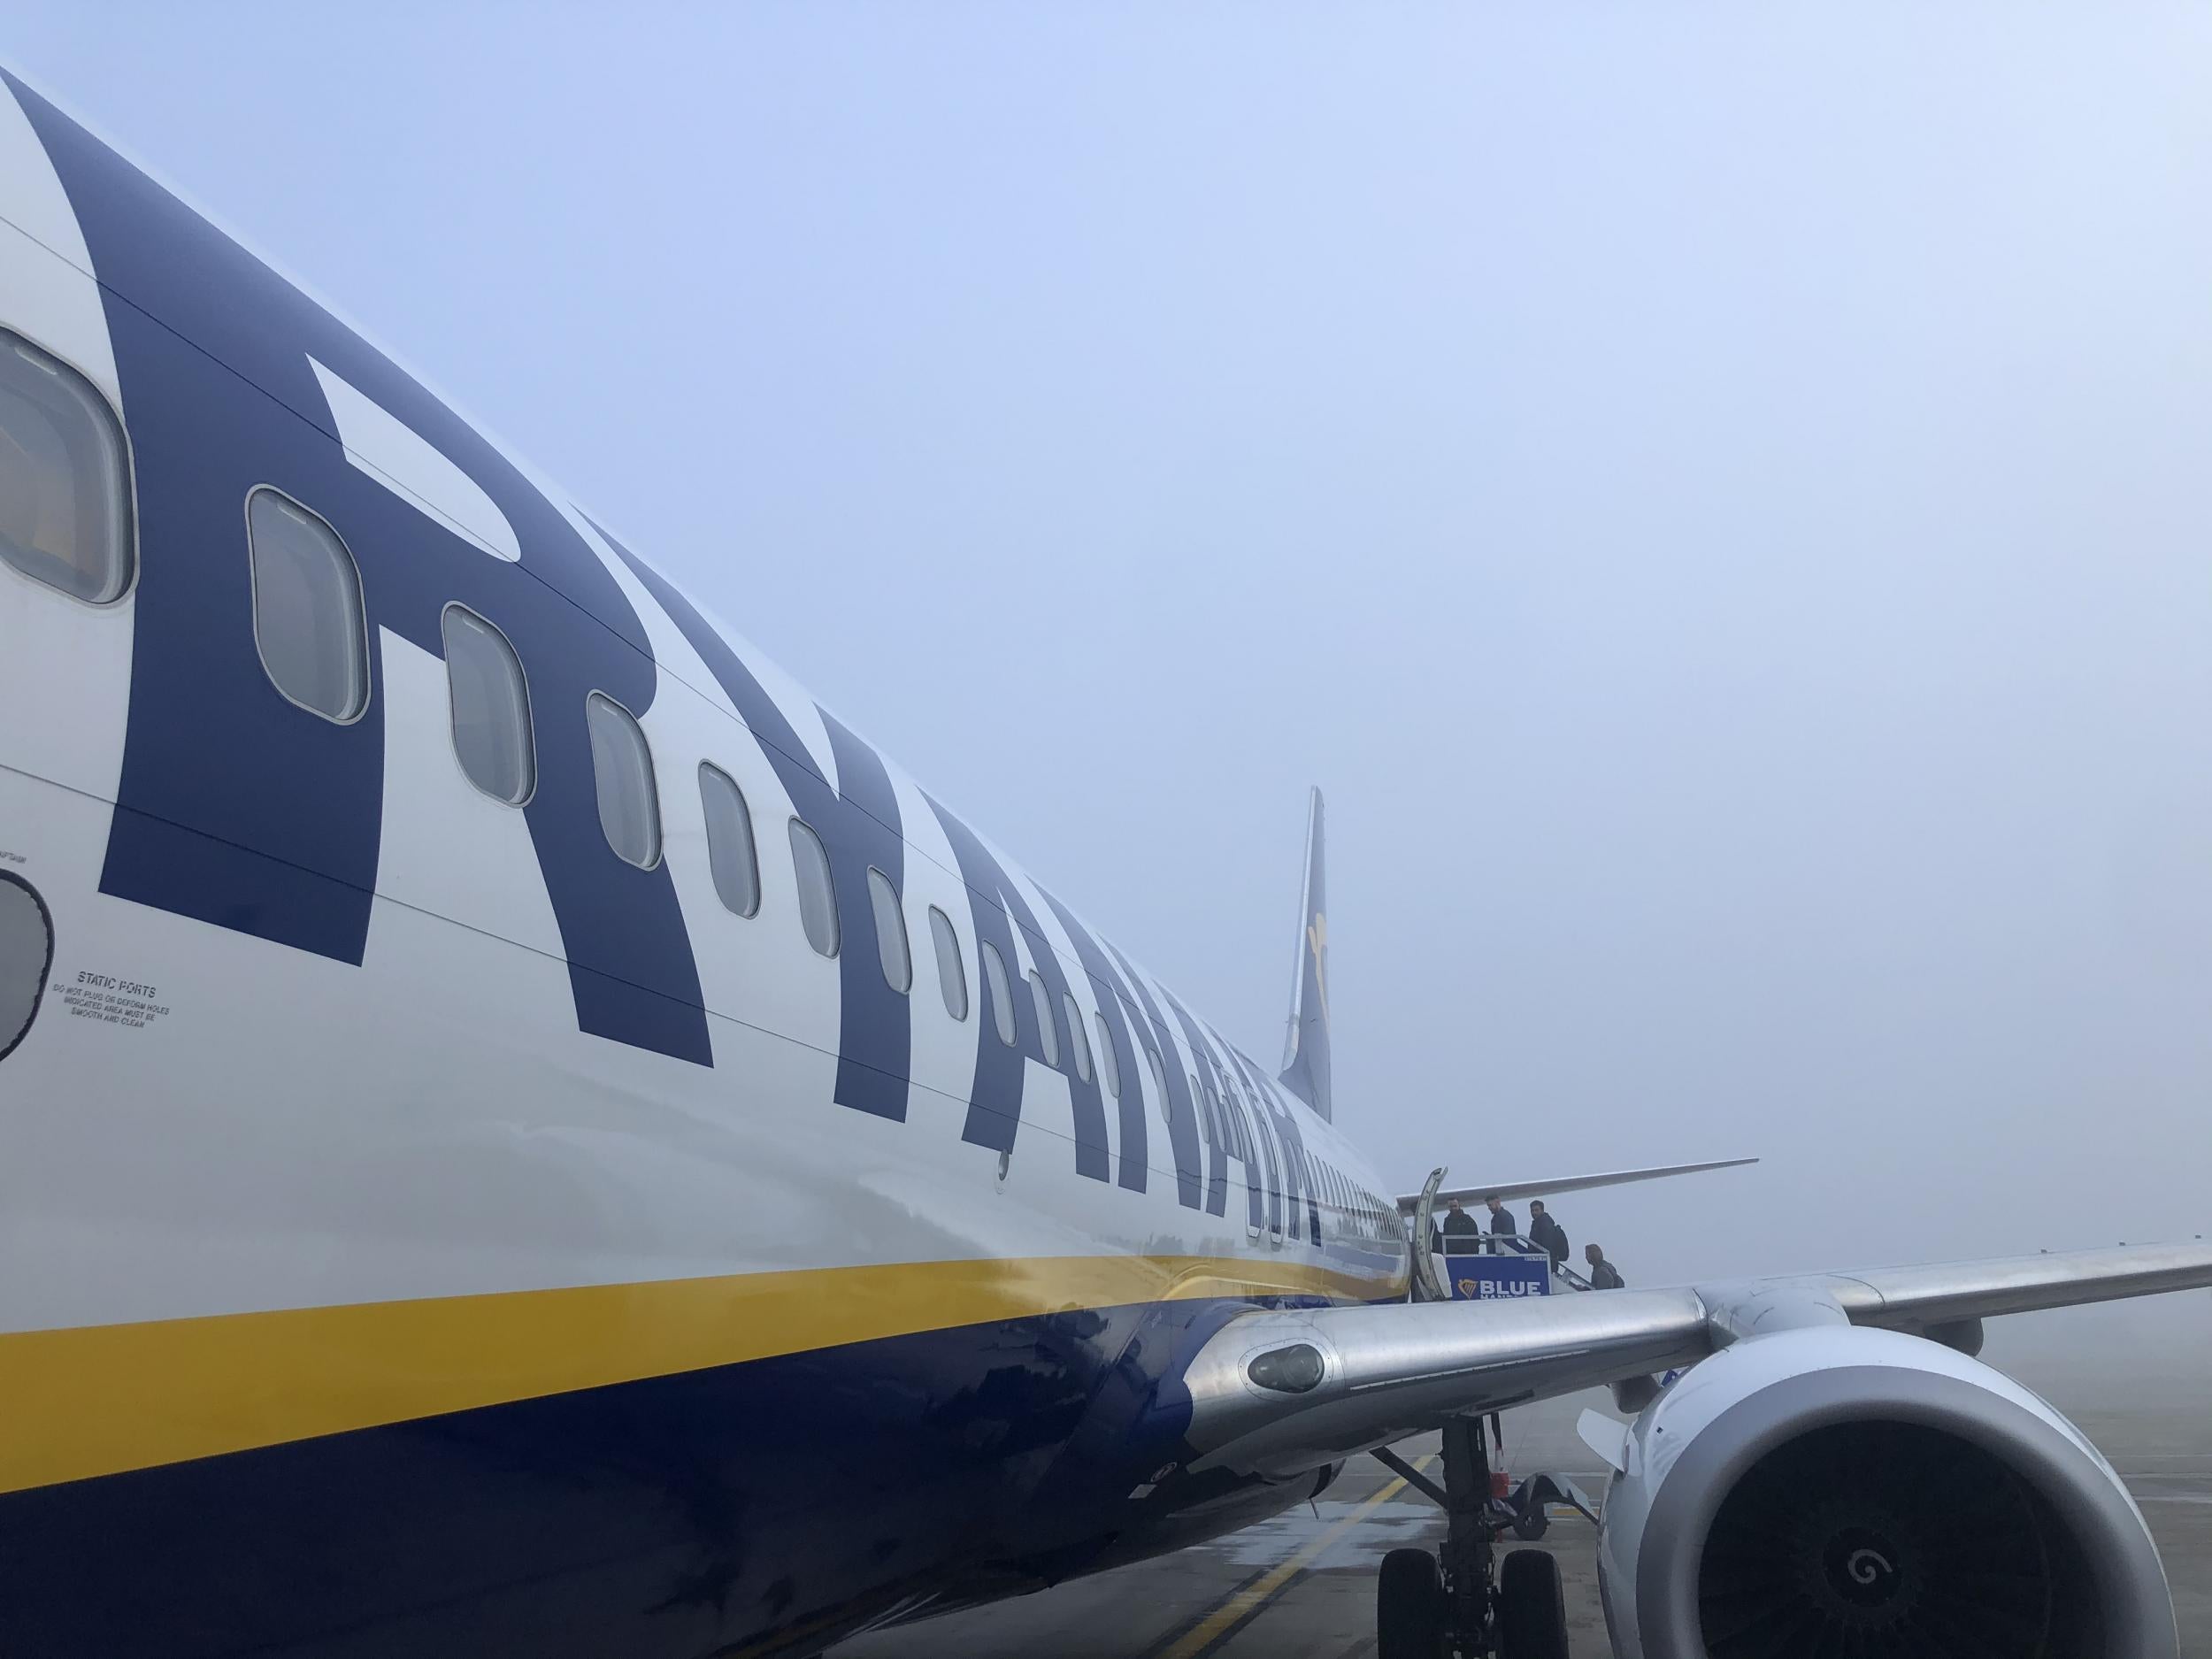 Waiting game: Ryanair has confused passengers once more over refunds